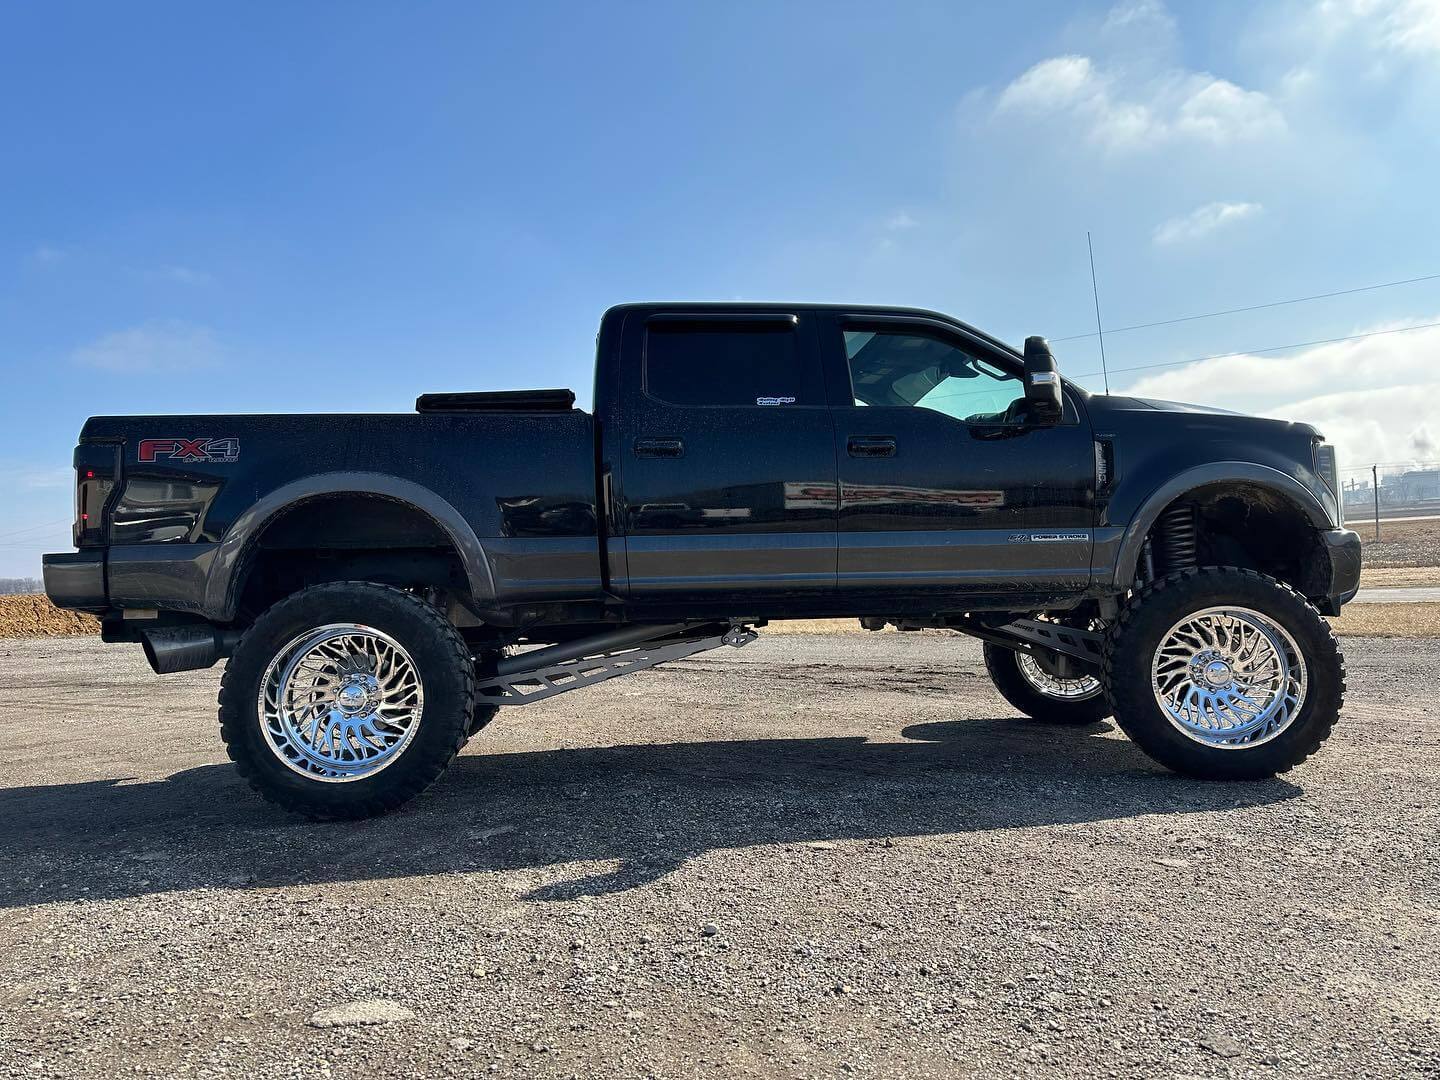 Black truck with new wheels